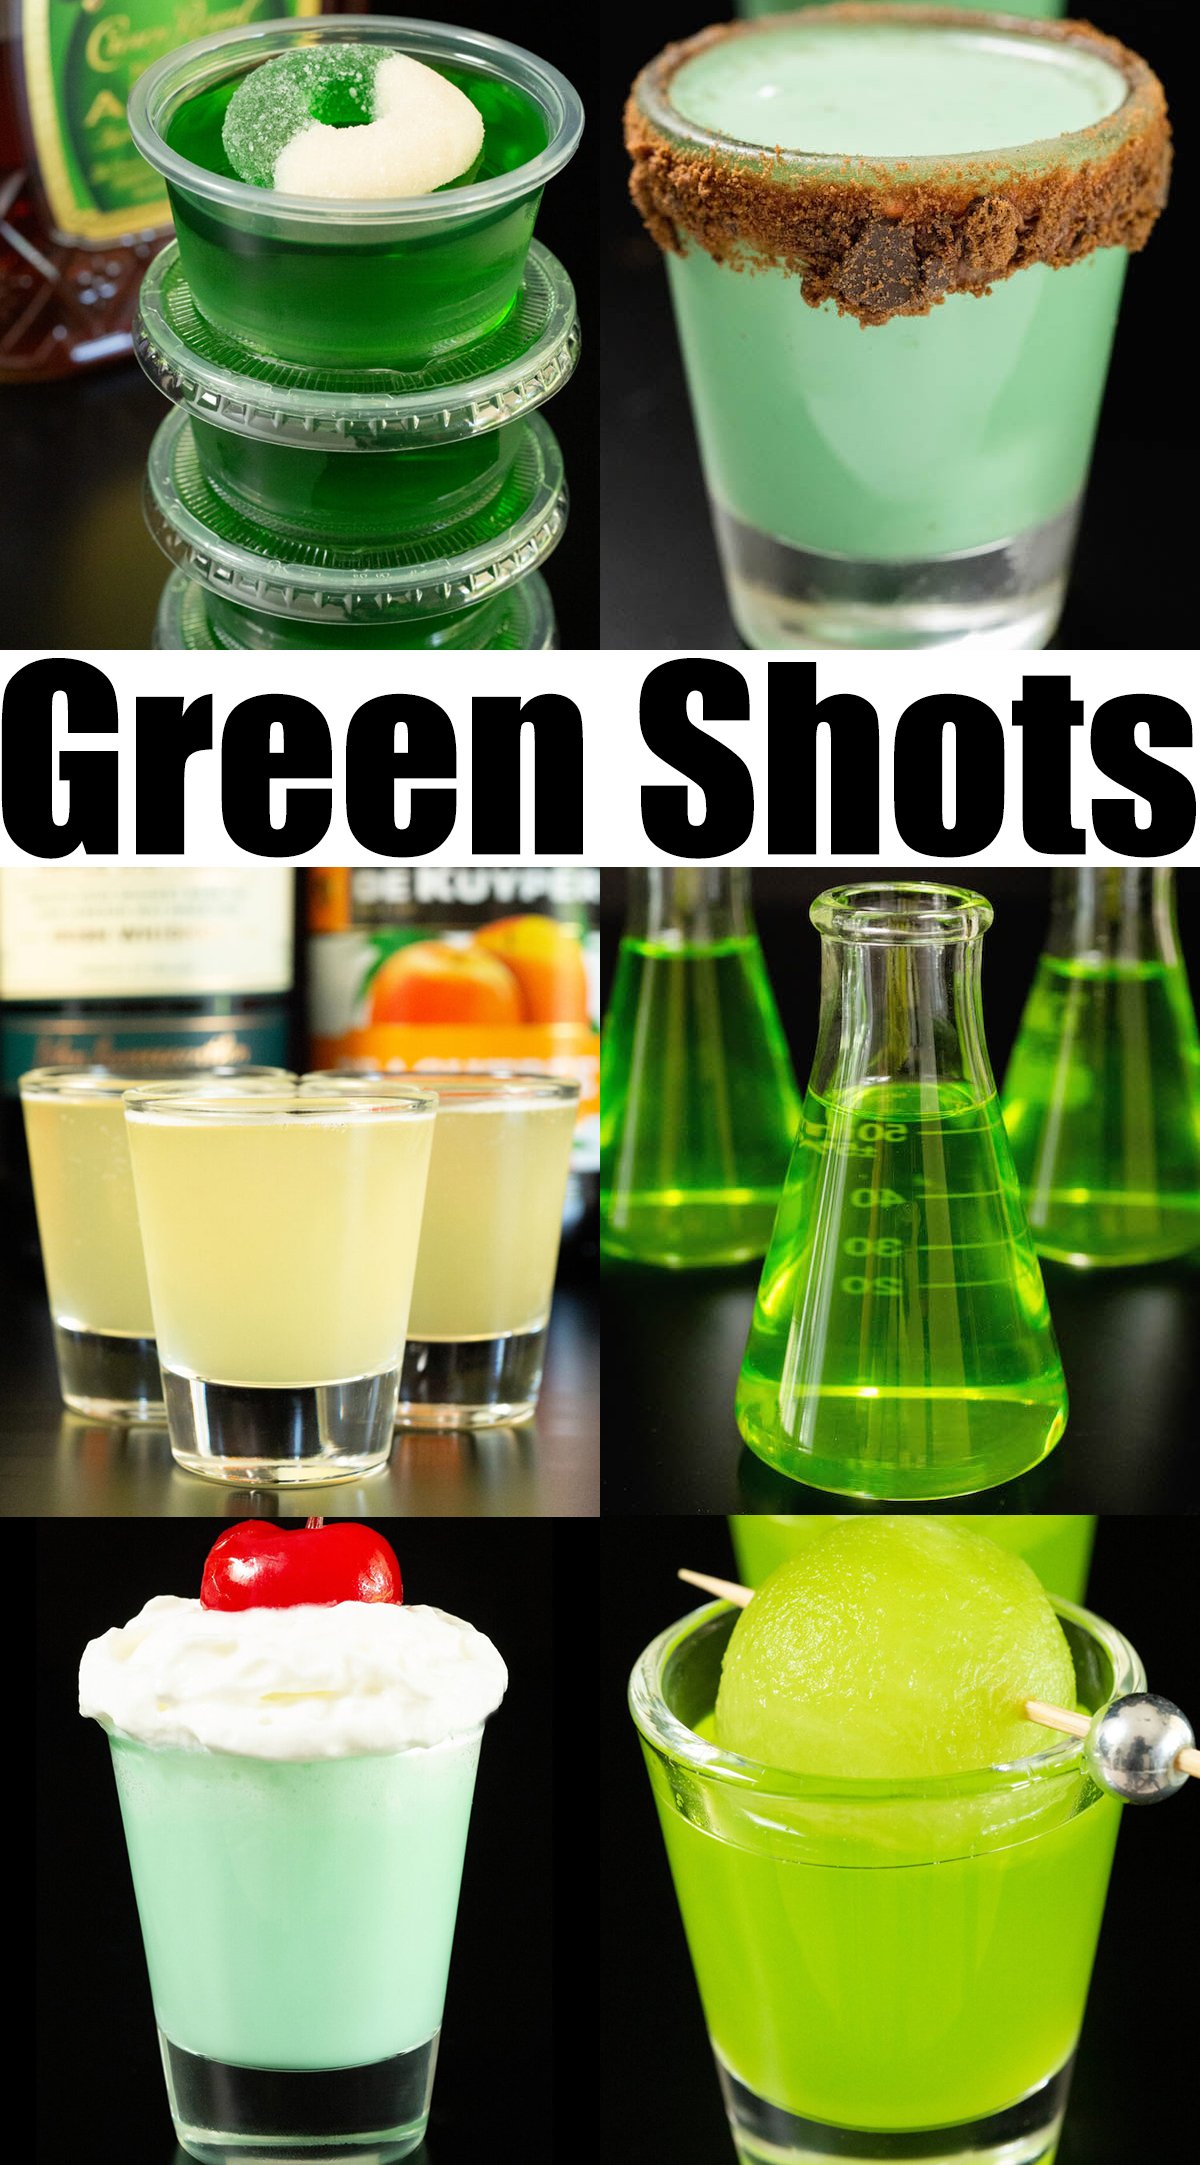 A photo collage showing six different green colored shots. Bold text in the middle reads "Green Shots".